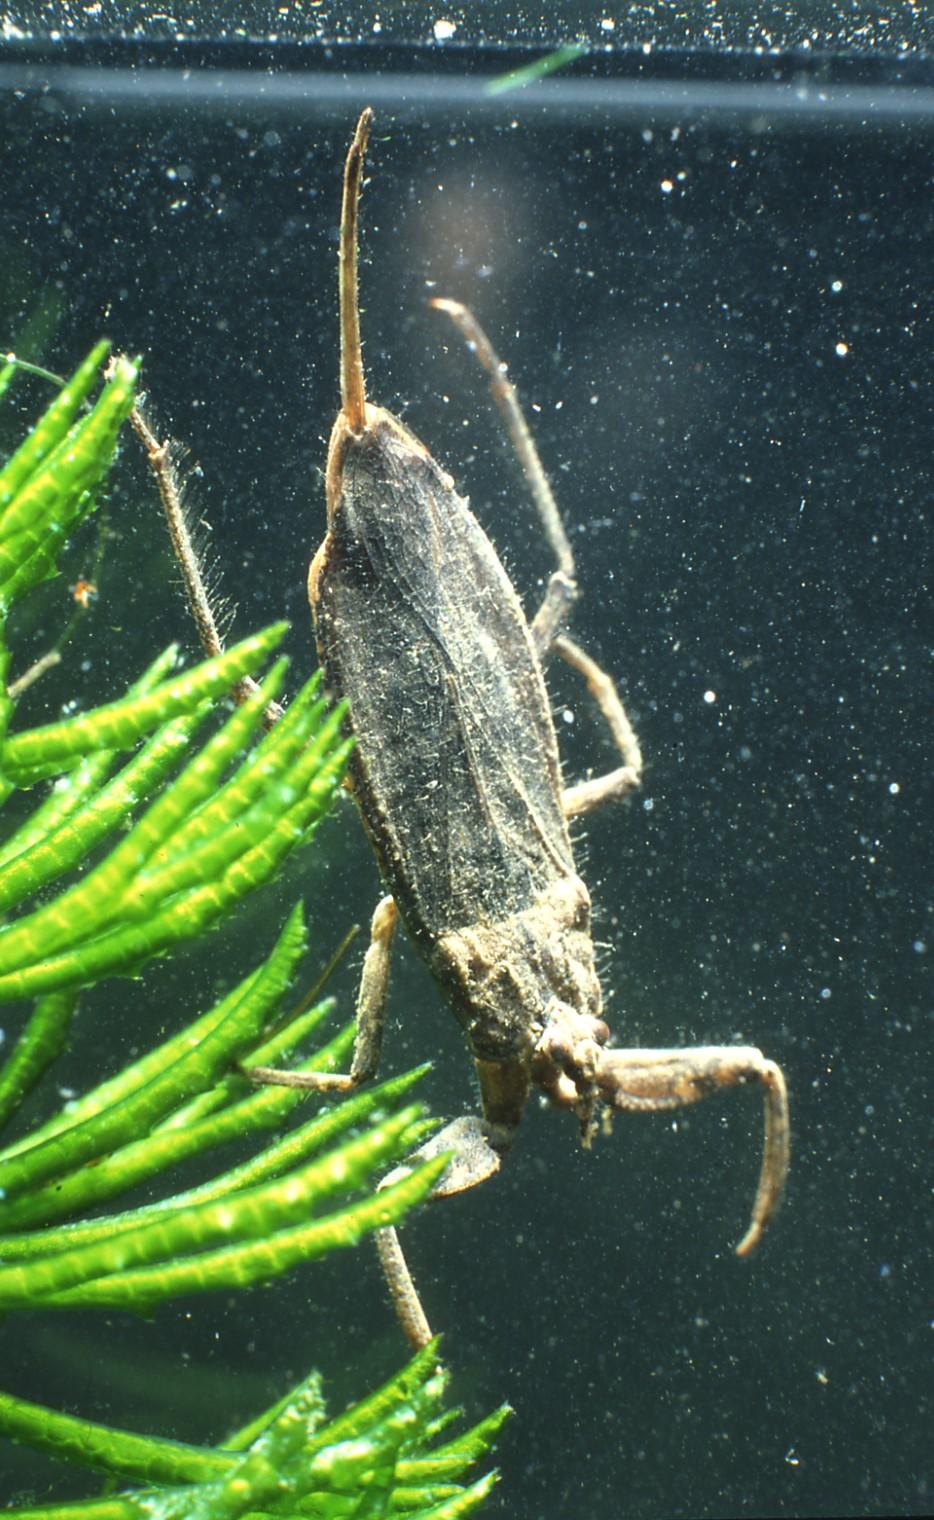 Whilst identification to species of many of the smaller aquatic bugs can be more complicated those described here are fairly straightforward.